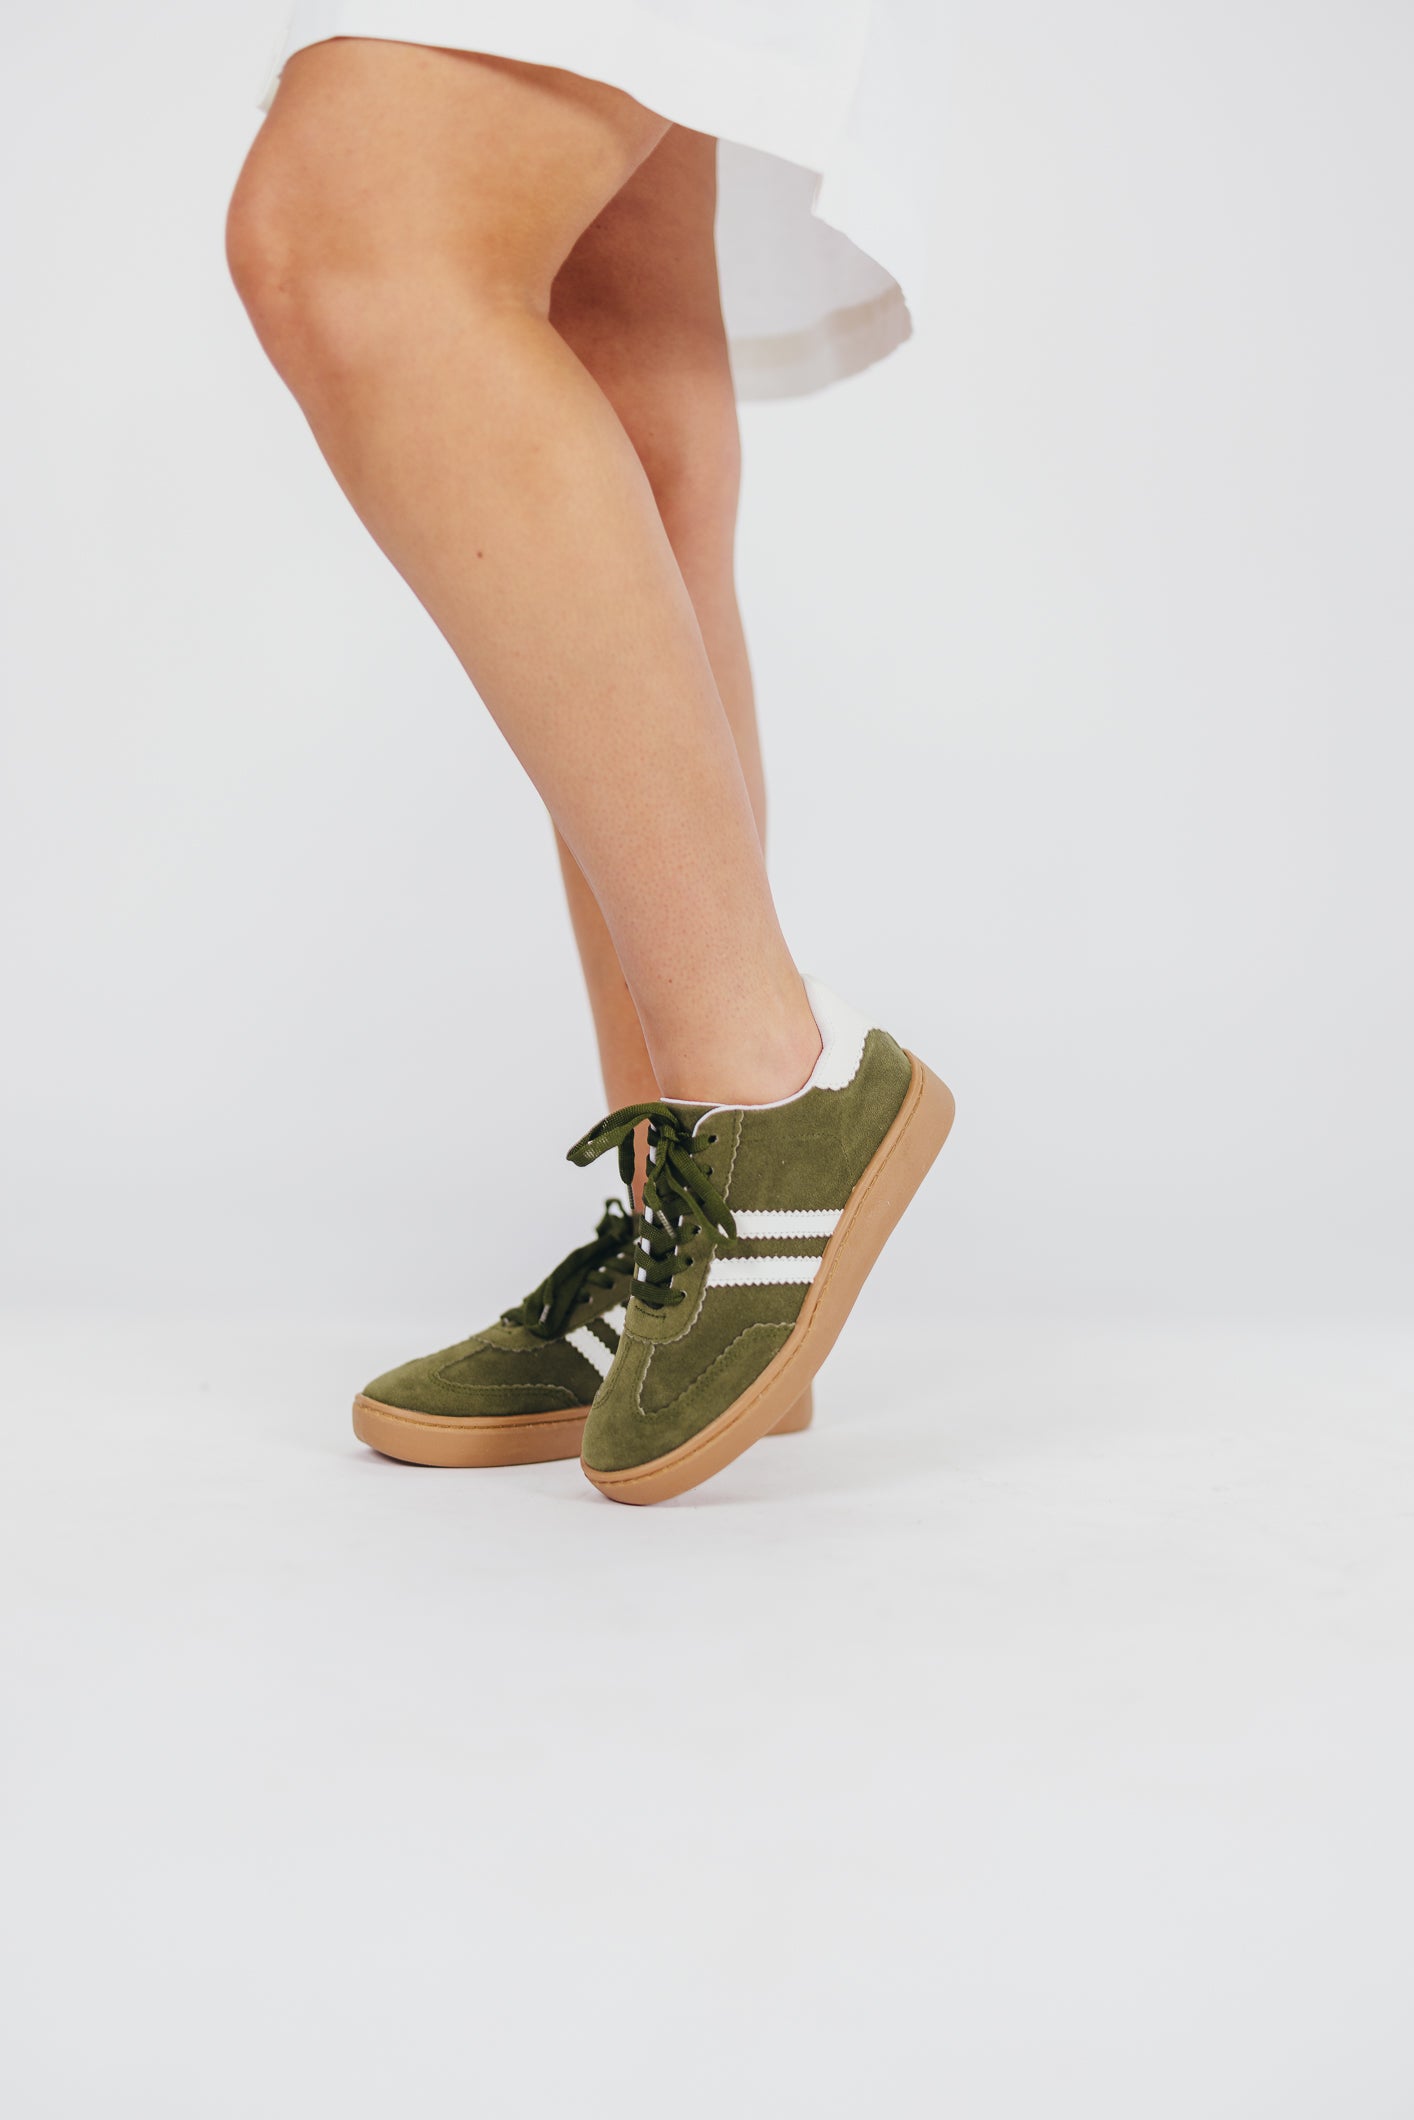 Miel 75 in Olive